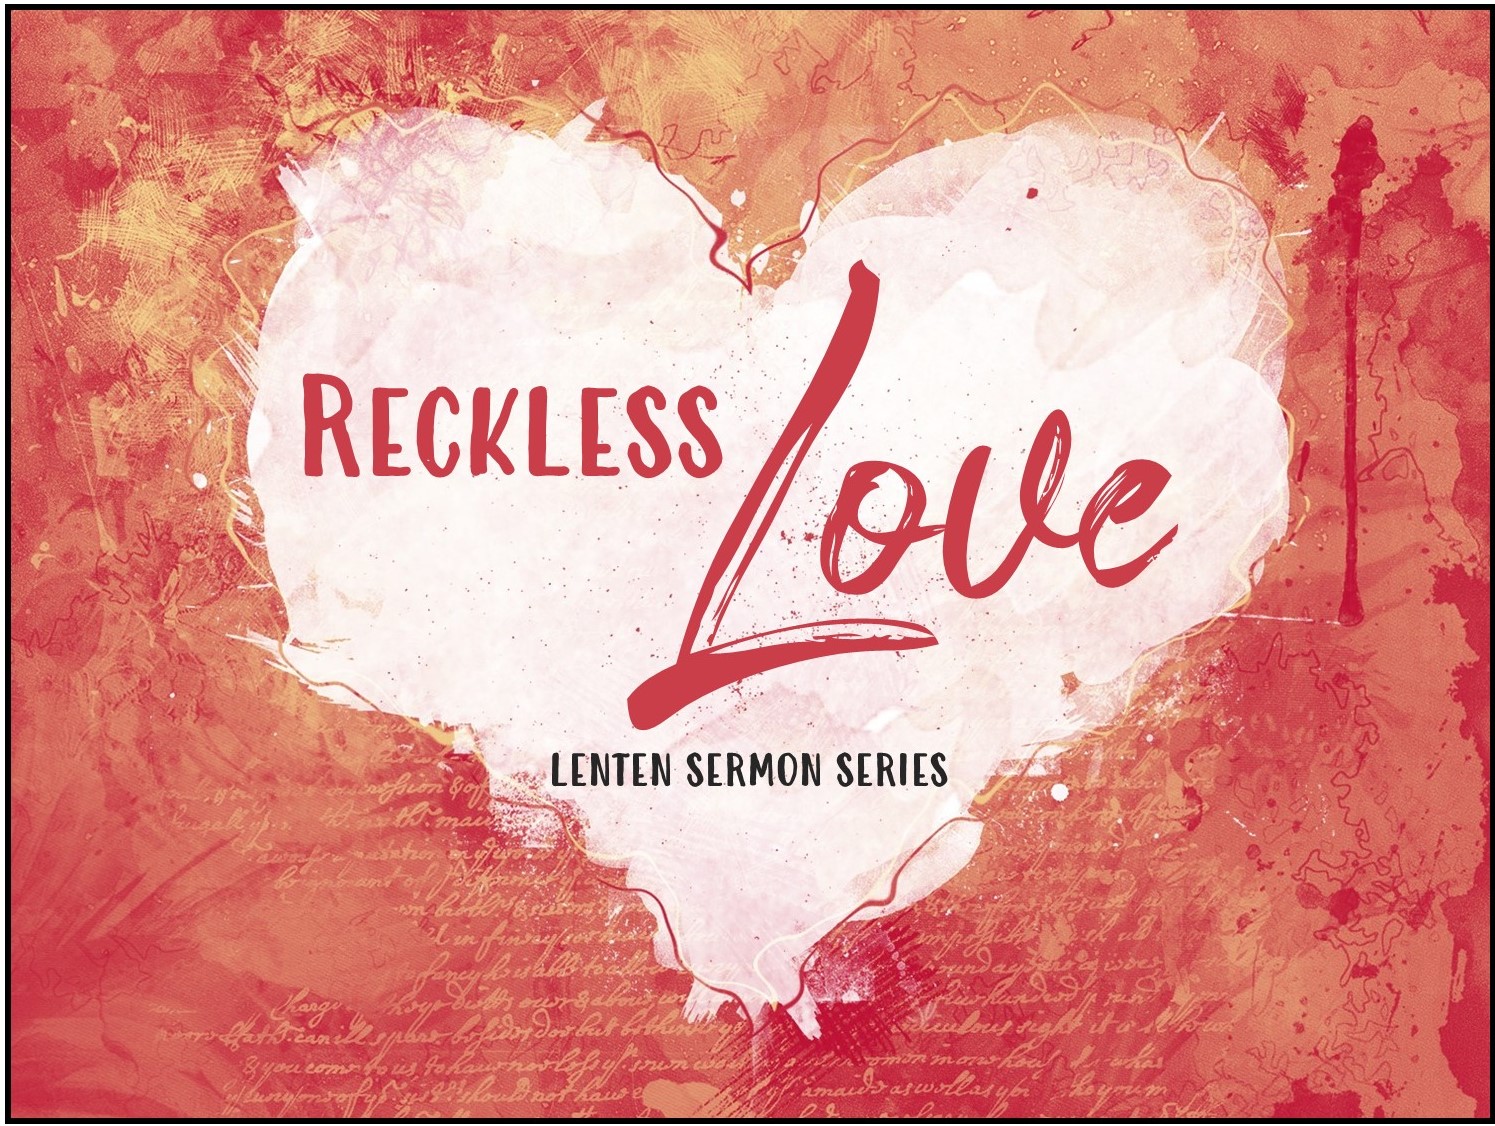 "Reckless Love"